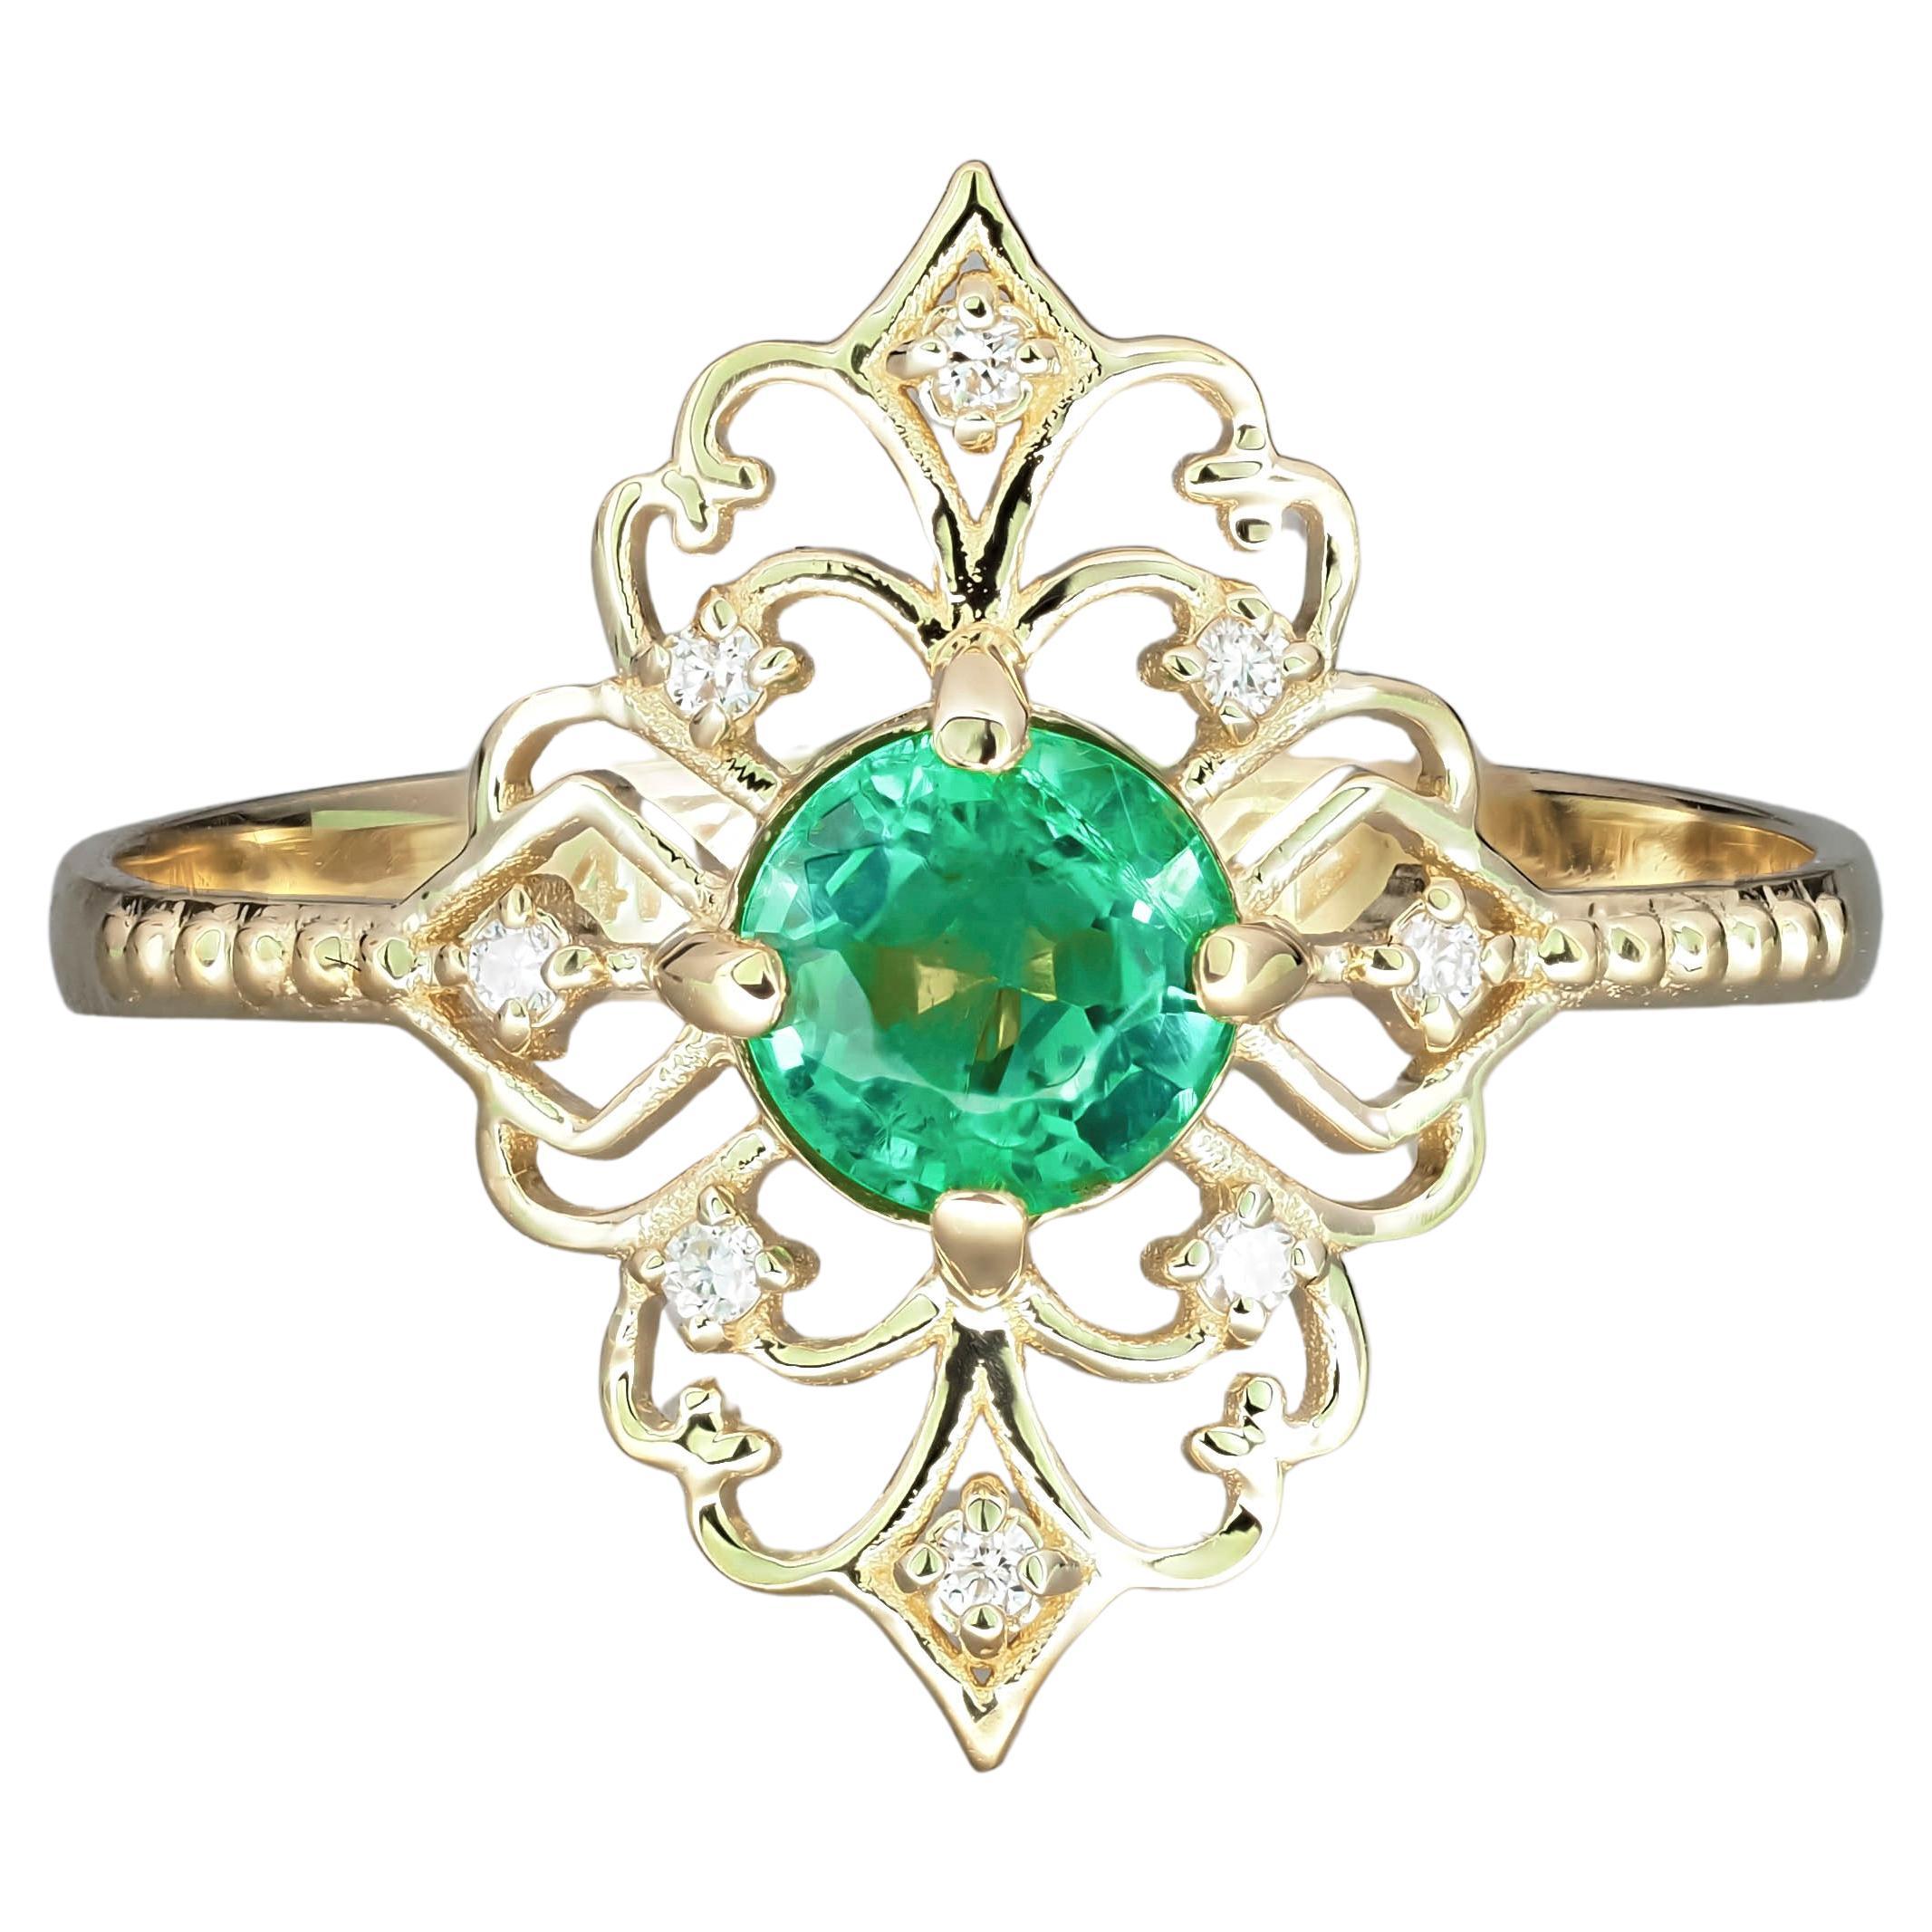 14 K Gold Ring with Emerald and Diamonds